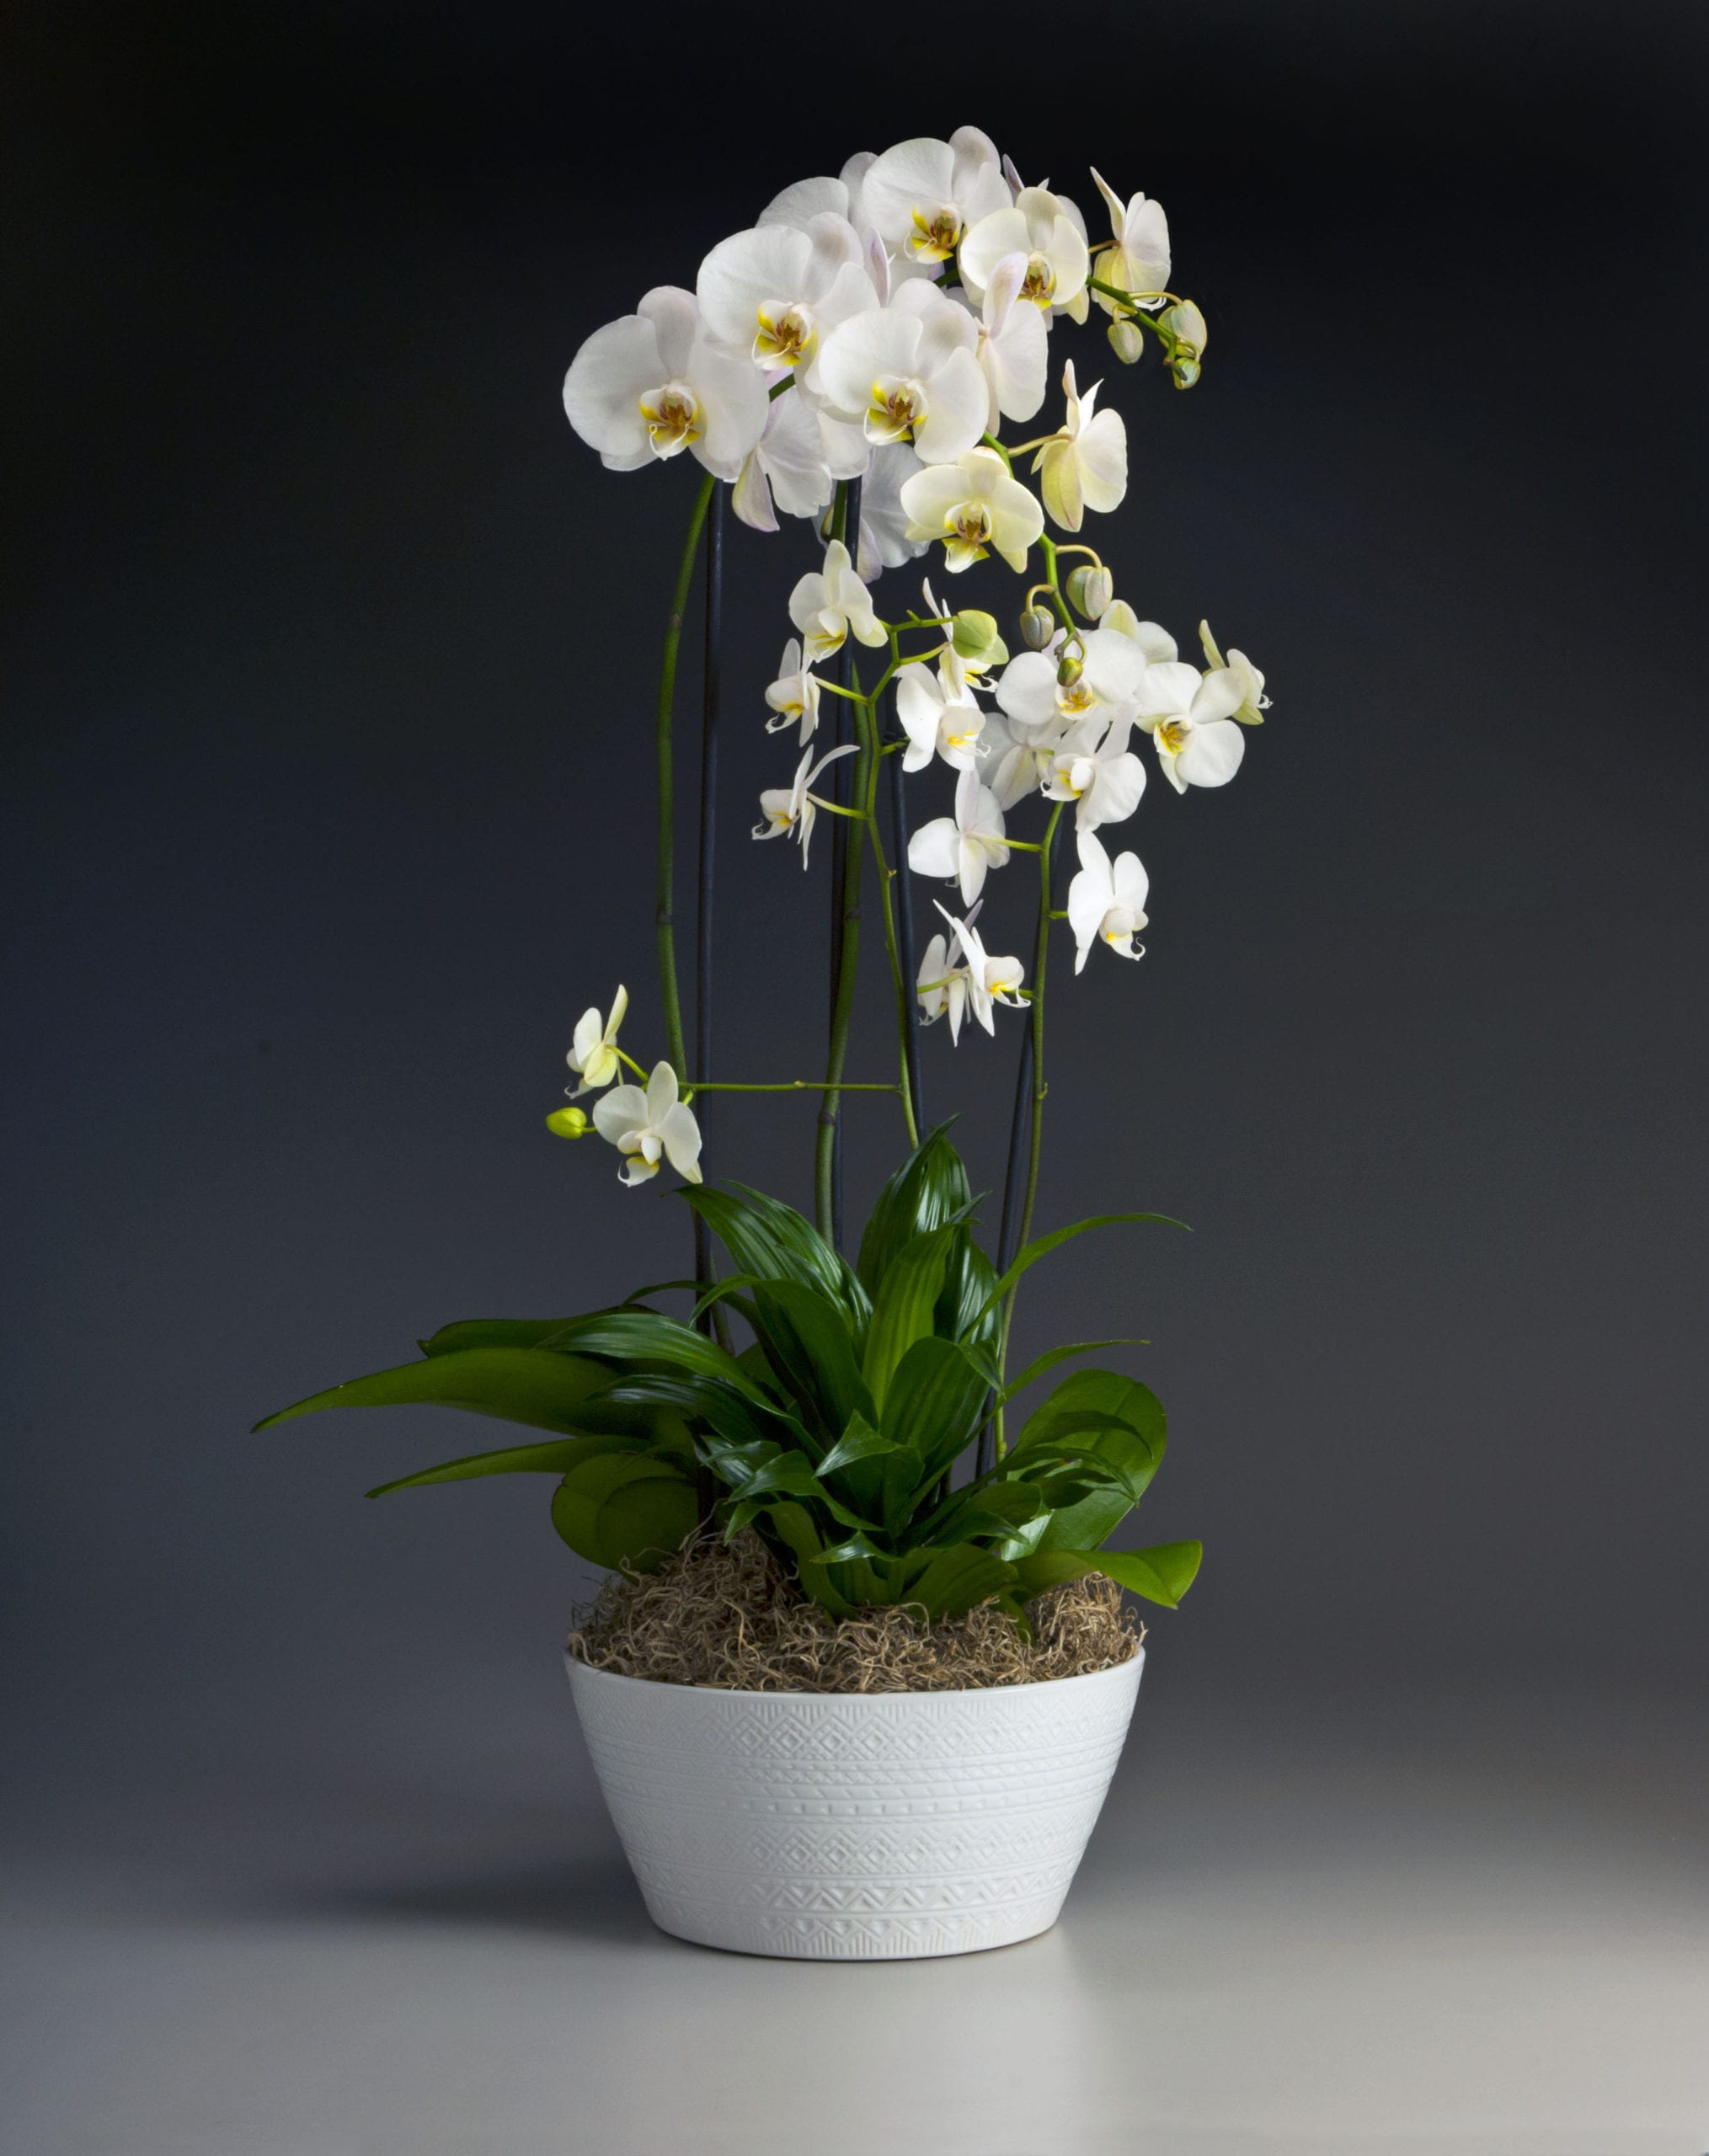 Industry Leader Westerlay Orchids to Showcase World-Class Collection Guided by Forward-Thinking Vision at the Tropical Plant International Expo,